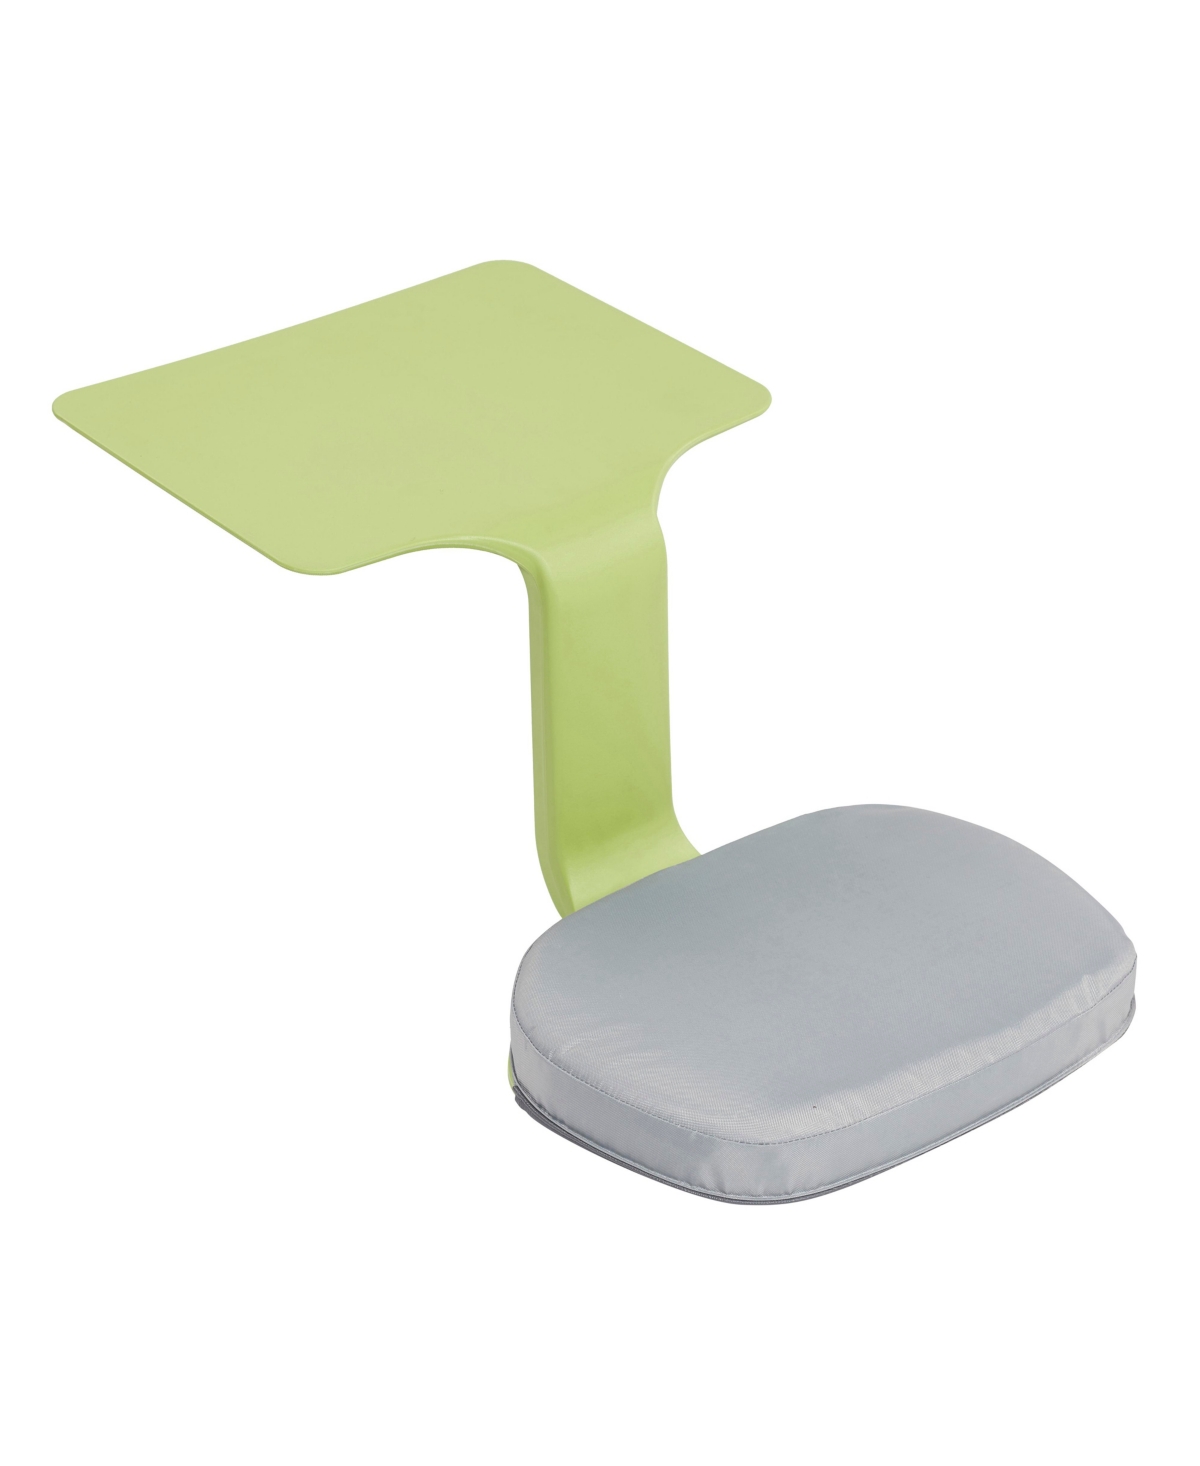 The Surf Portable Lap Desk with Cushion, Green - Light grey